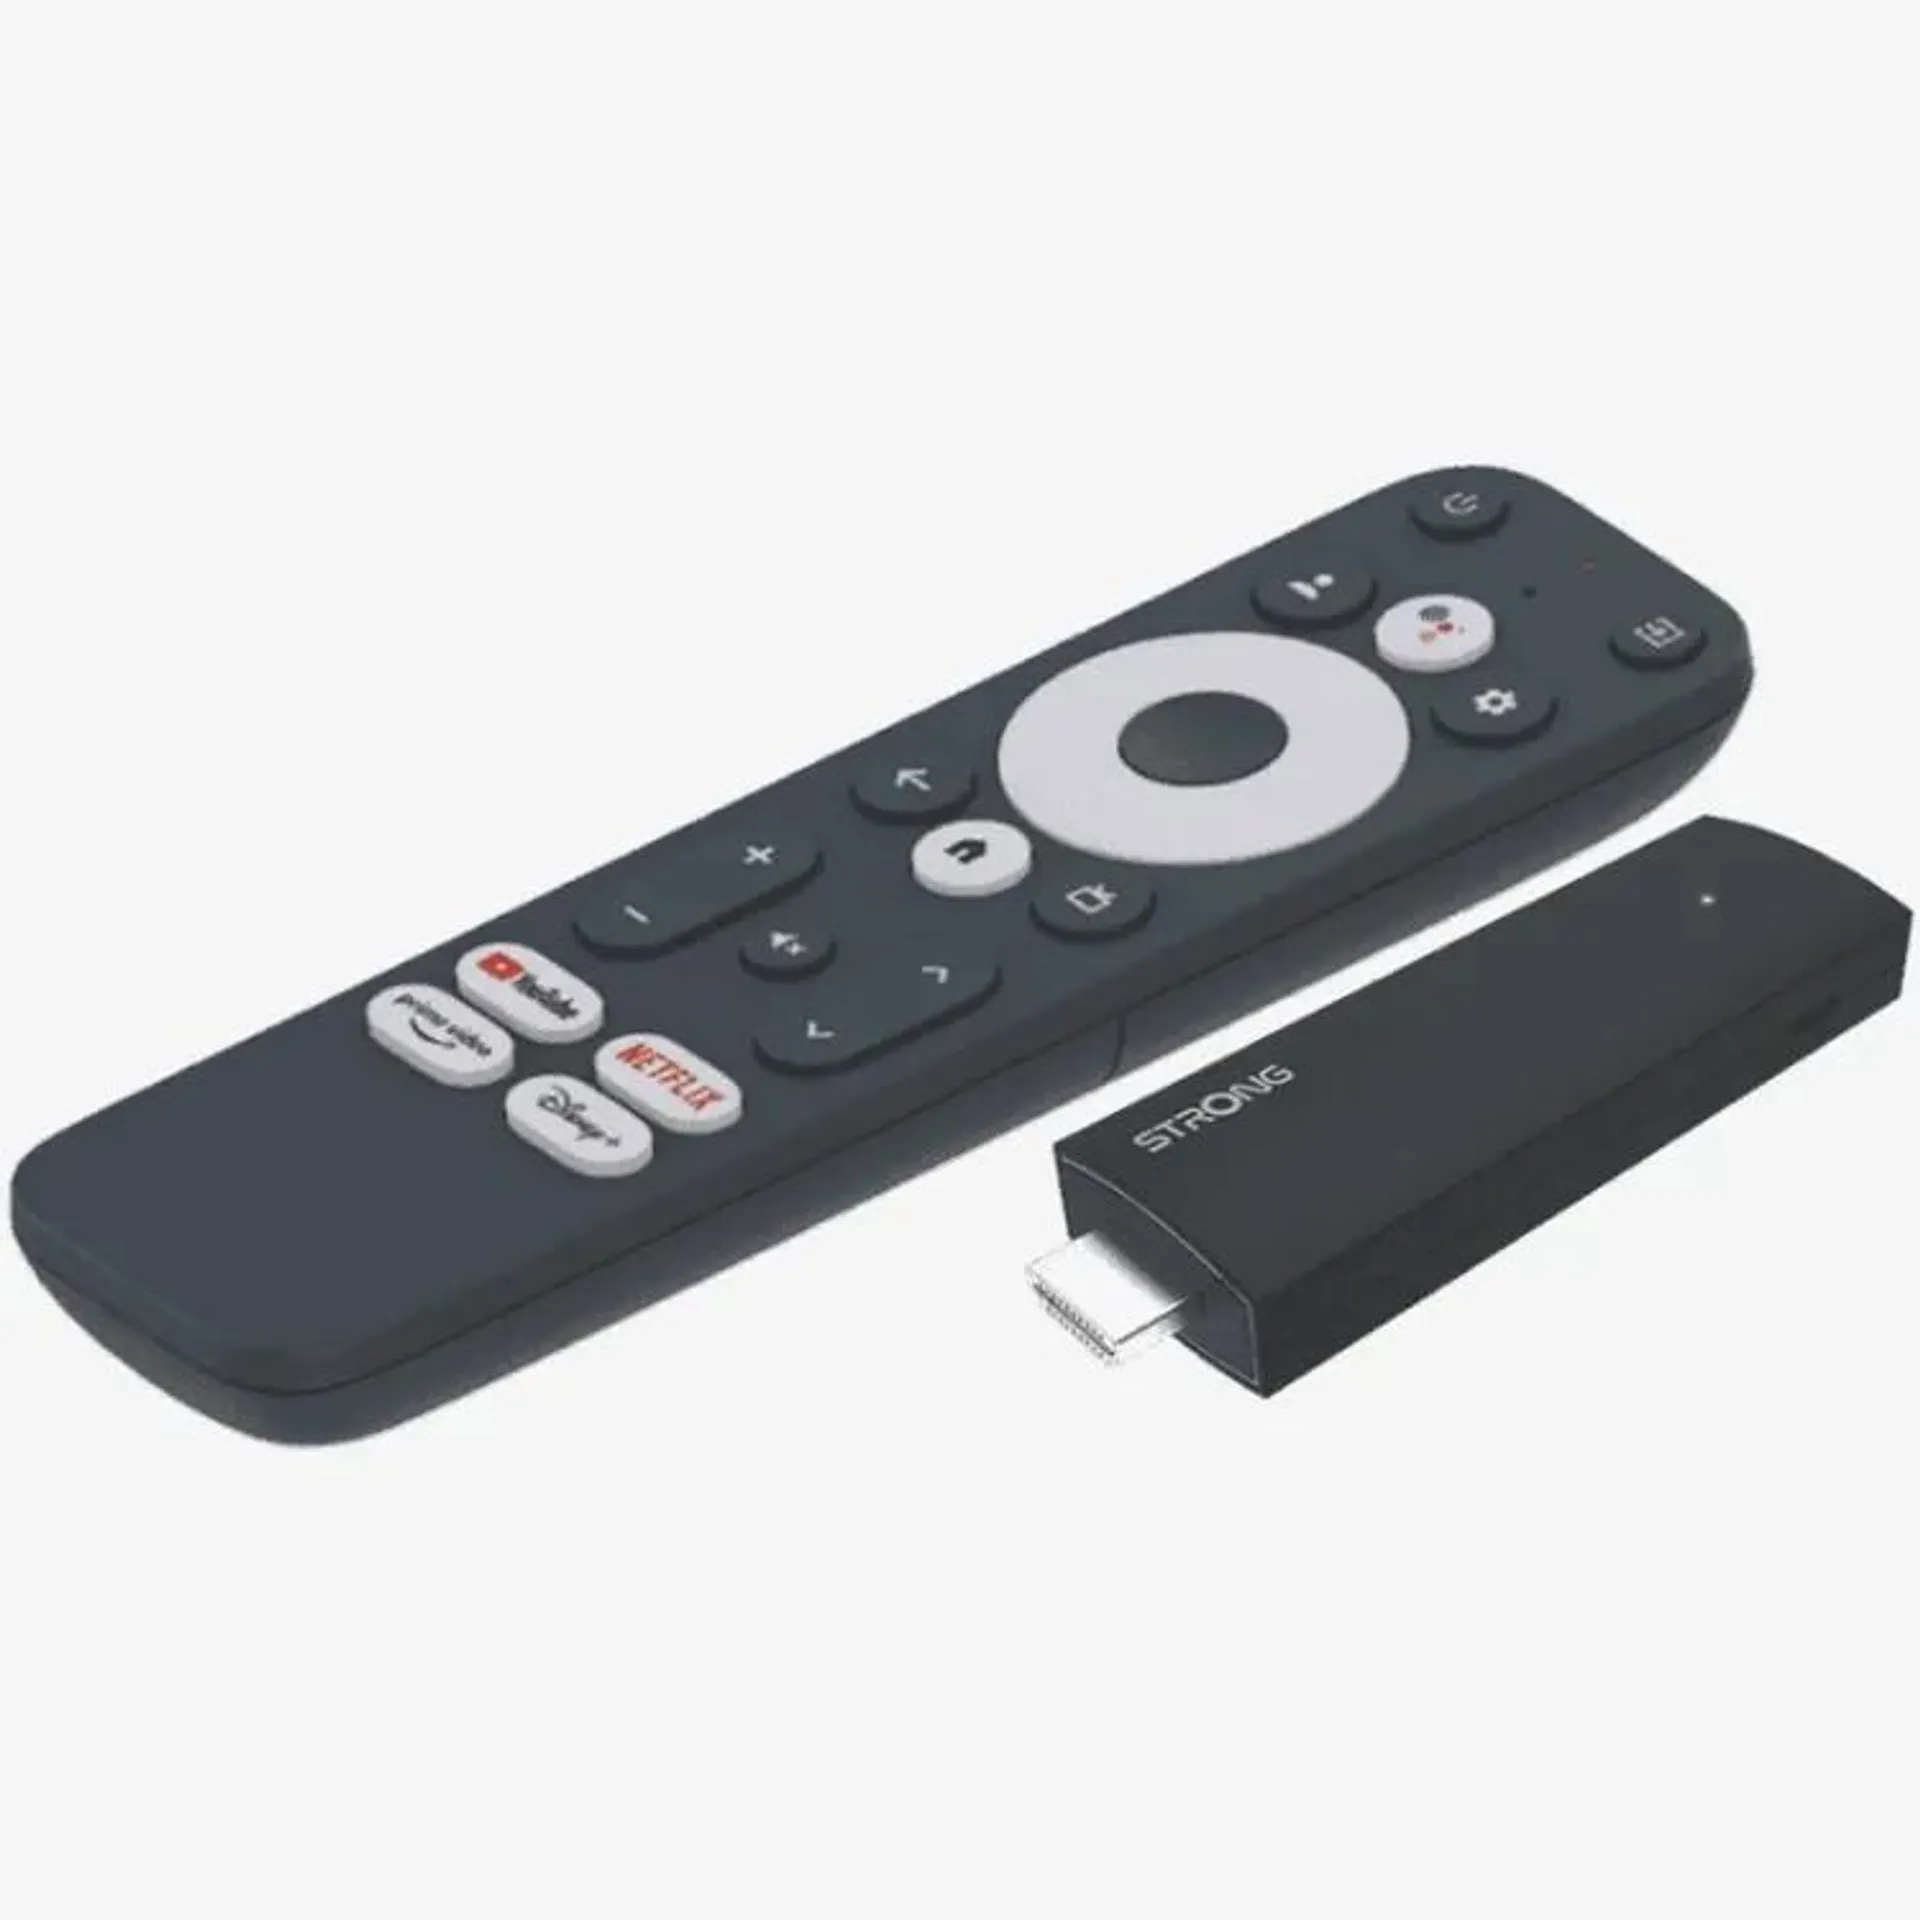 STRONG TV stick android SRT 41